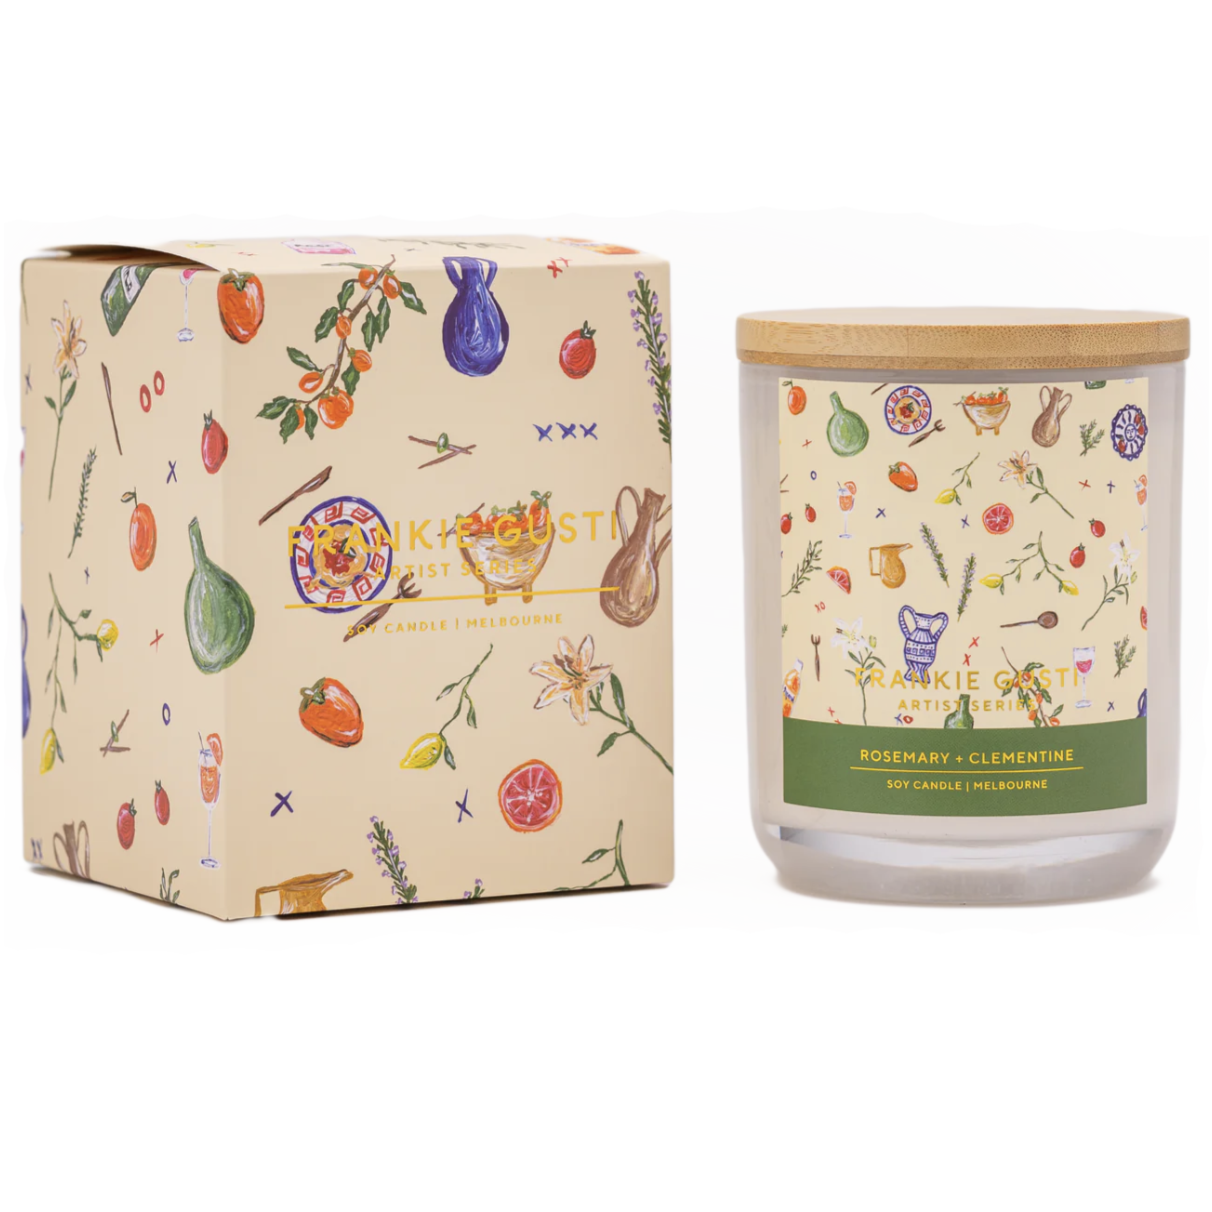 FRANKIE GUSTI ARTIST SERIES BRIGITTE GRANT ROSEMARY AND CLEMENTINE CANDLE